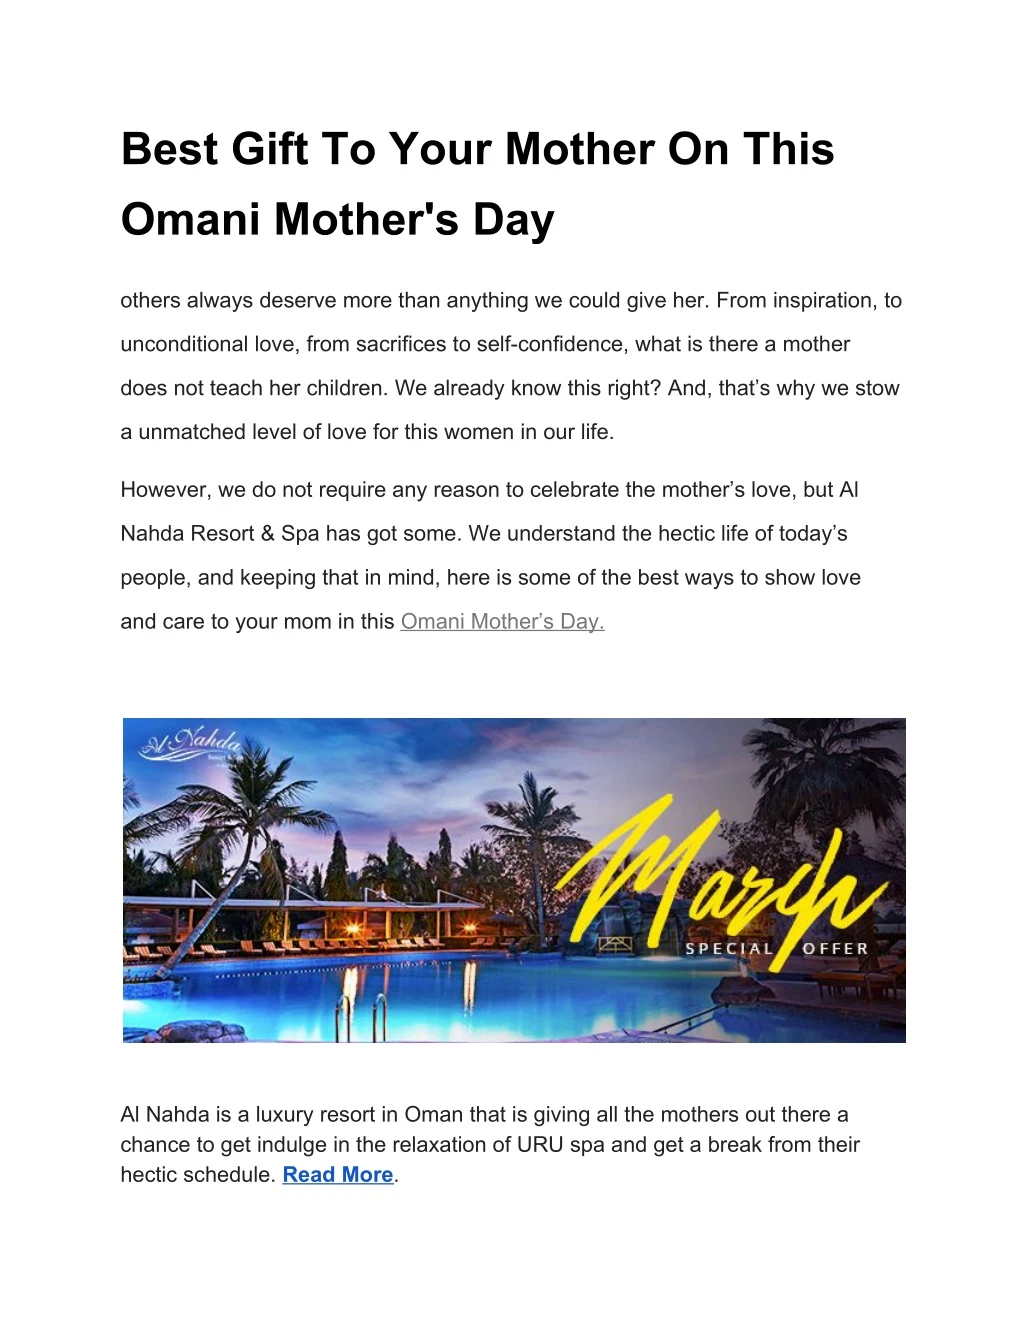 best gift to your mother on this omani mother